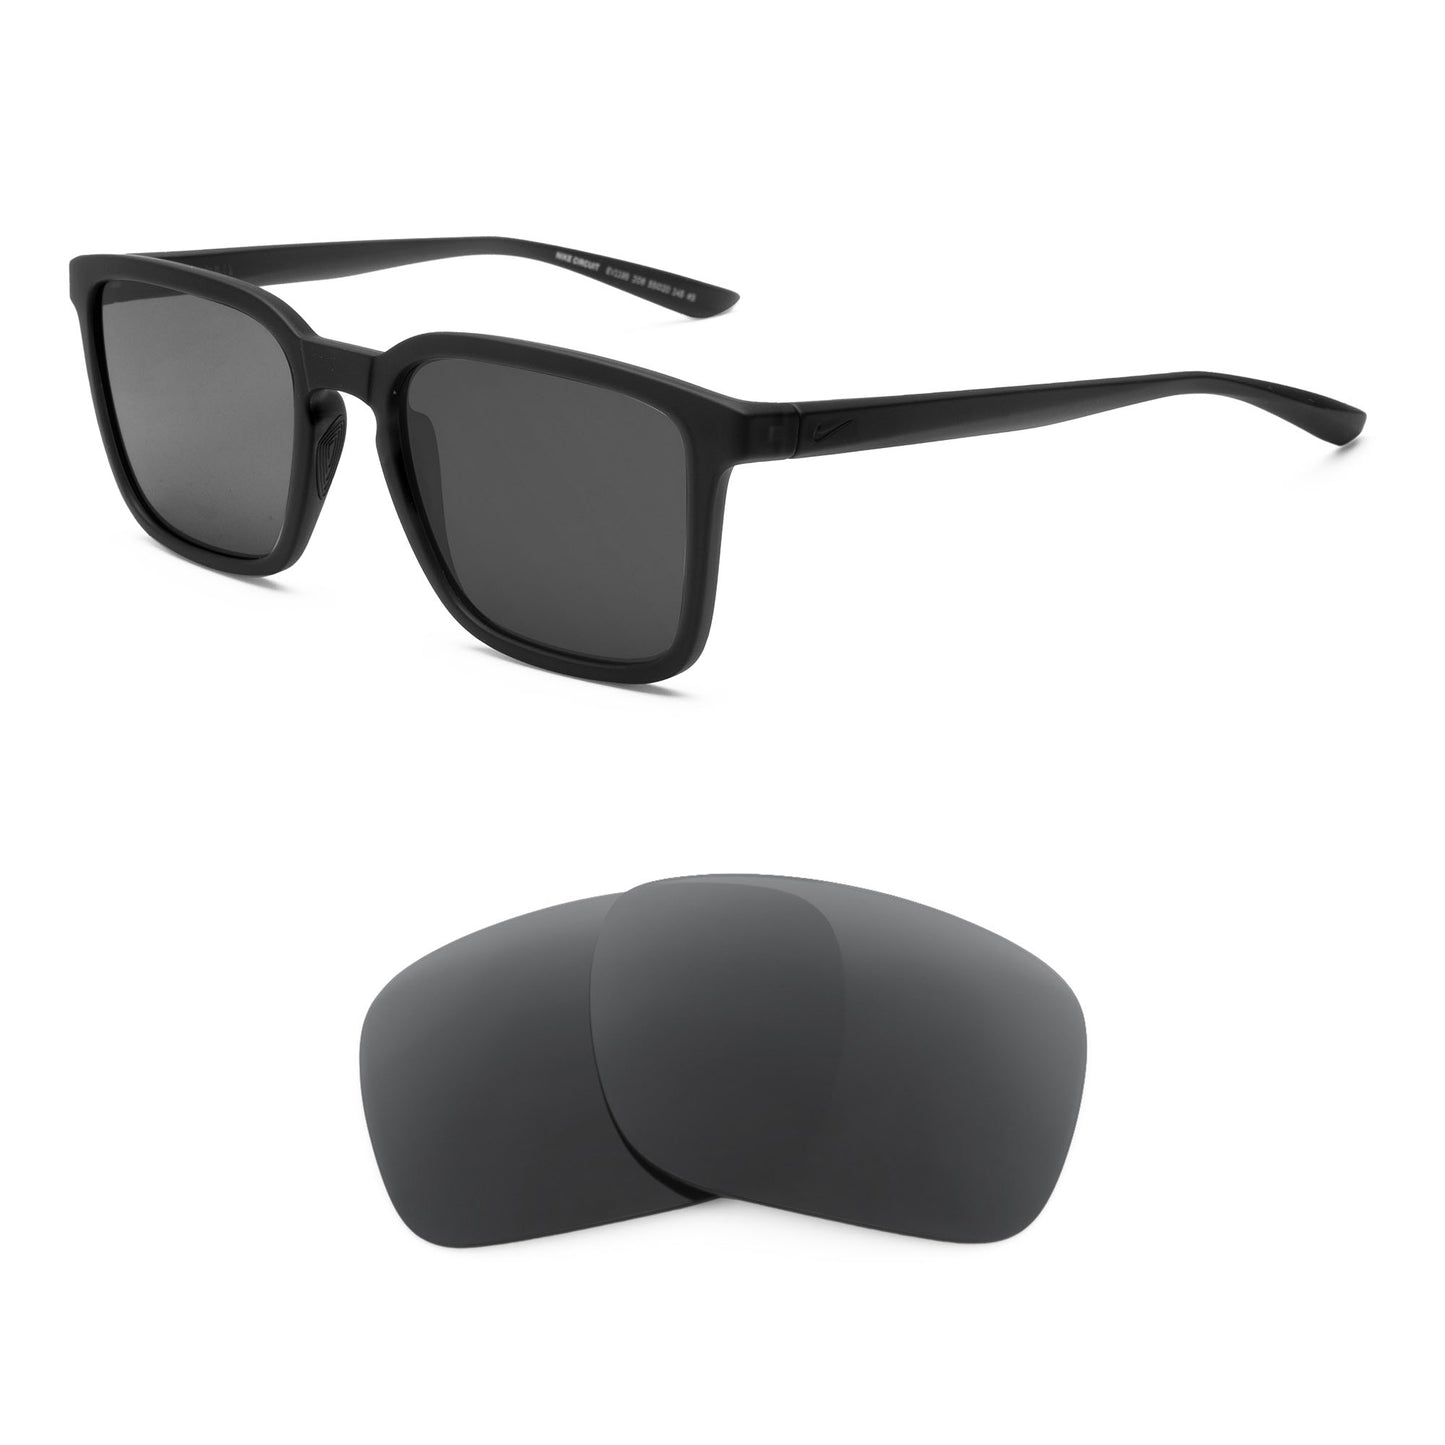 Nike Circuit sunglasses with replacement lenses